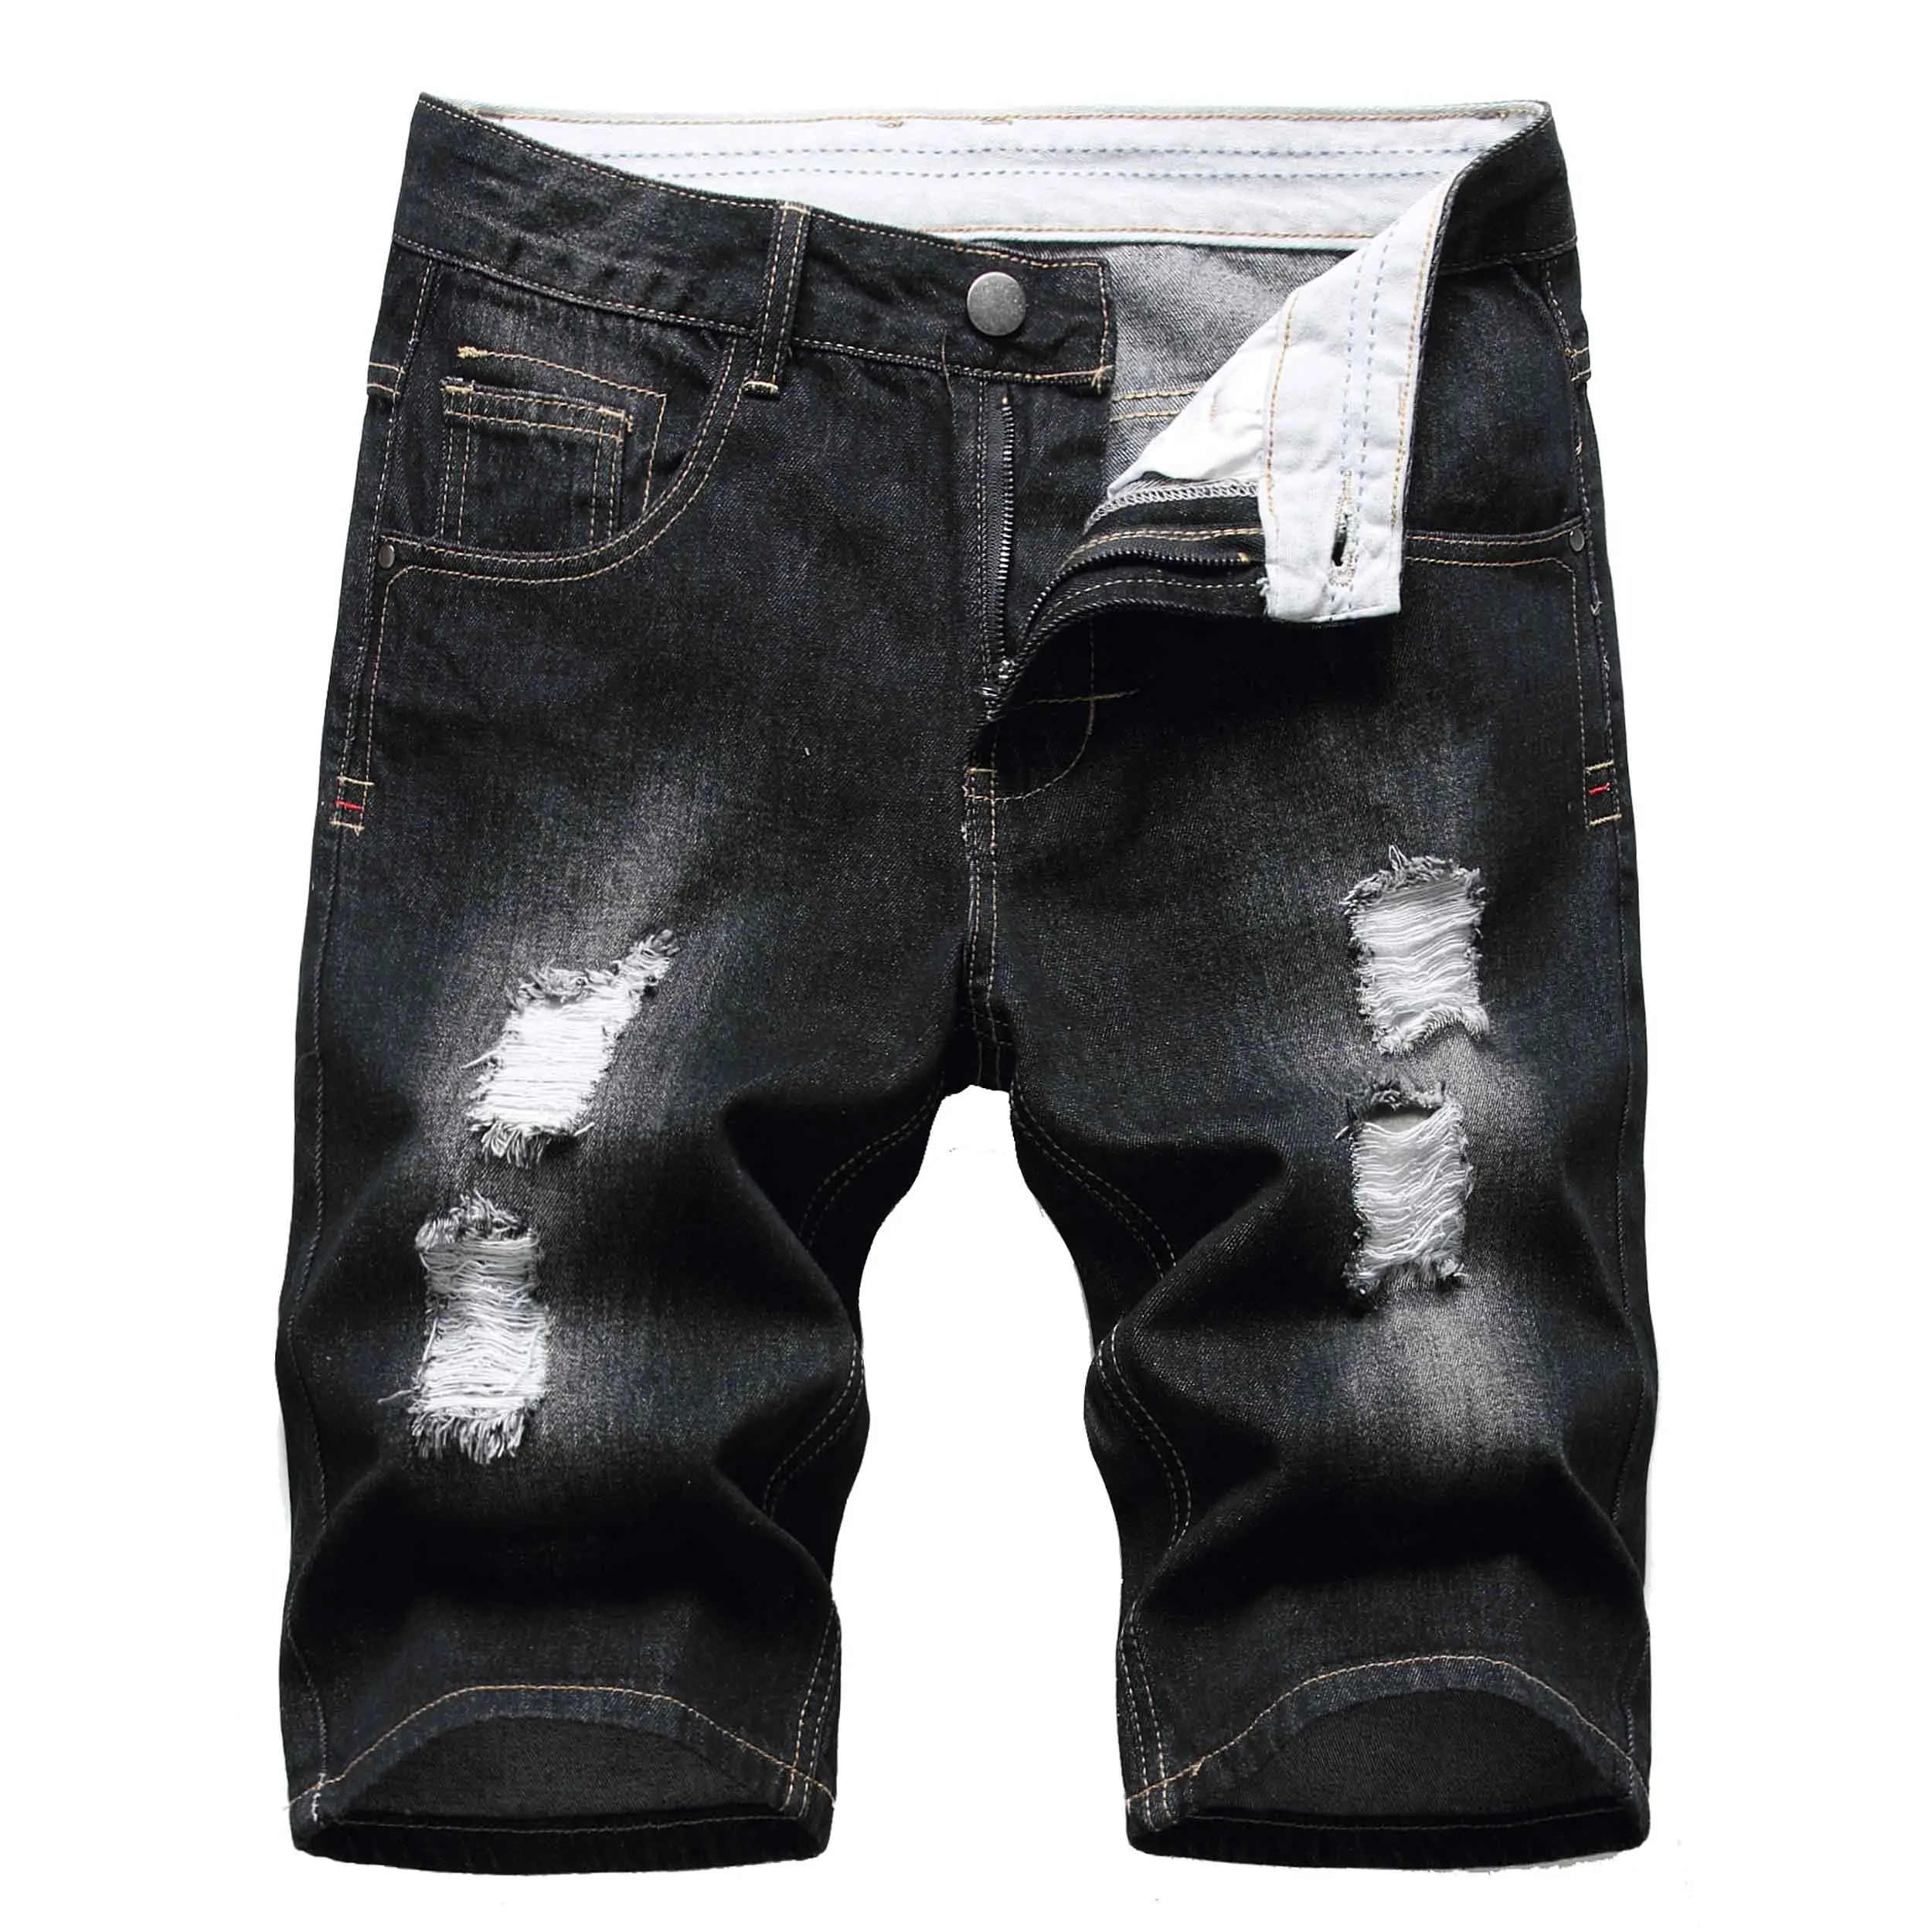 Durable jeans shorts high quality jeans mens regular fit men ripped jeans denim shorts